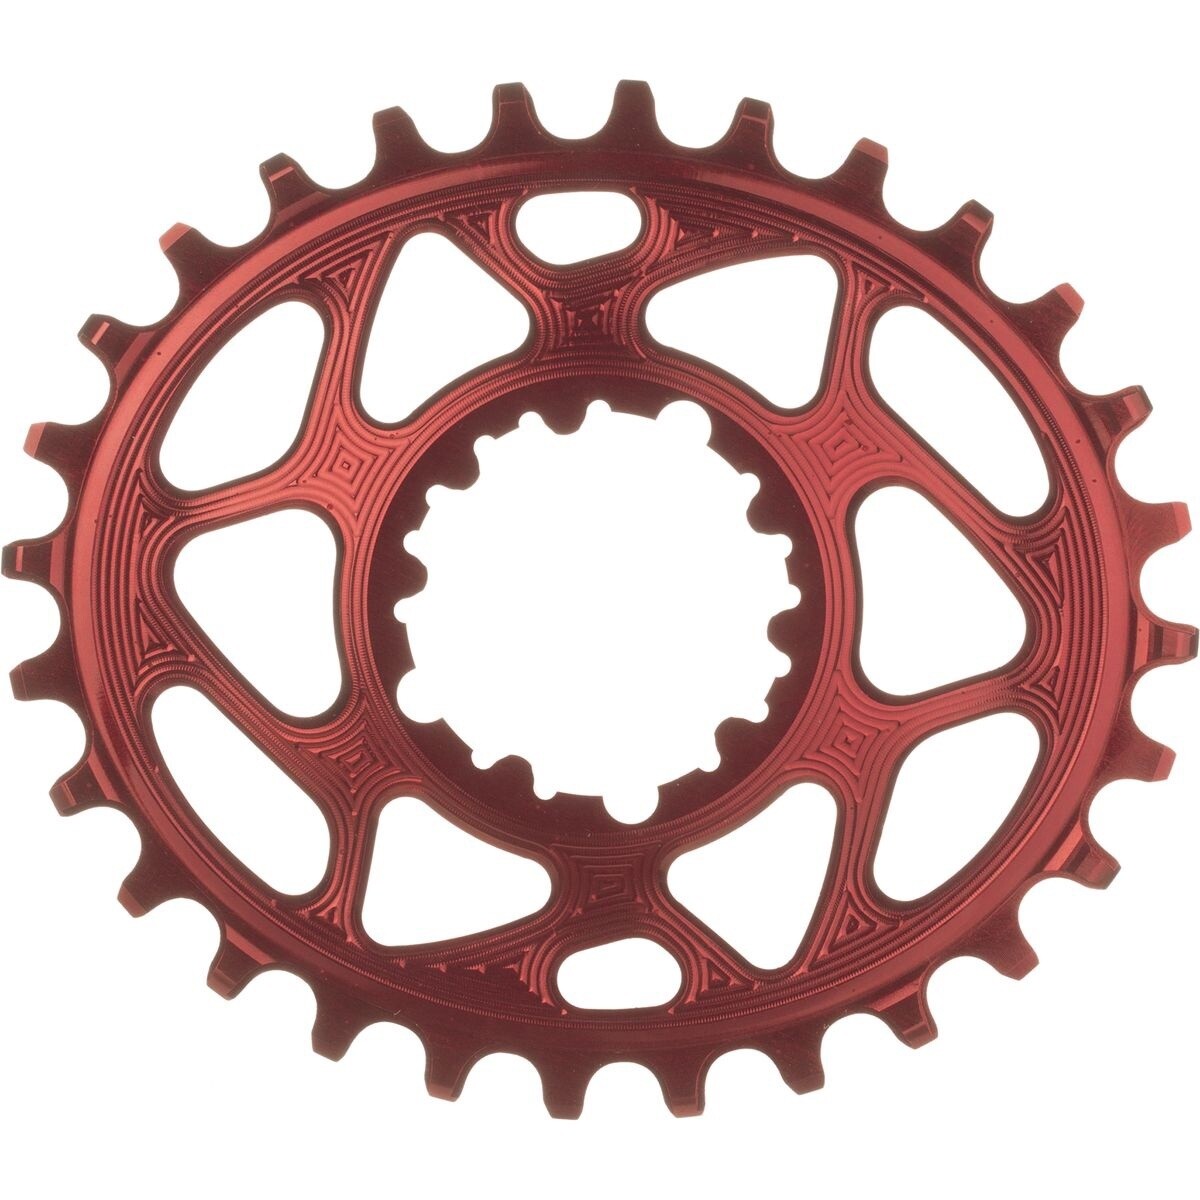 ABSOLUT BLACK OVAL CHAINRING 32T RED BOOST SRAM